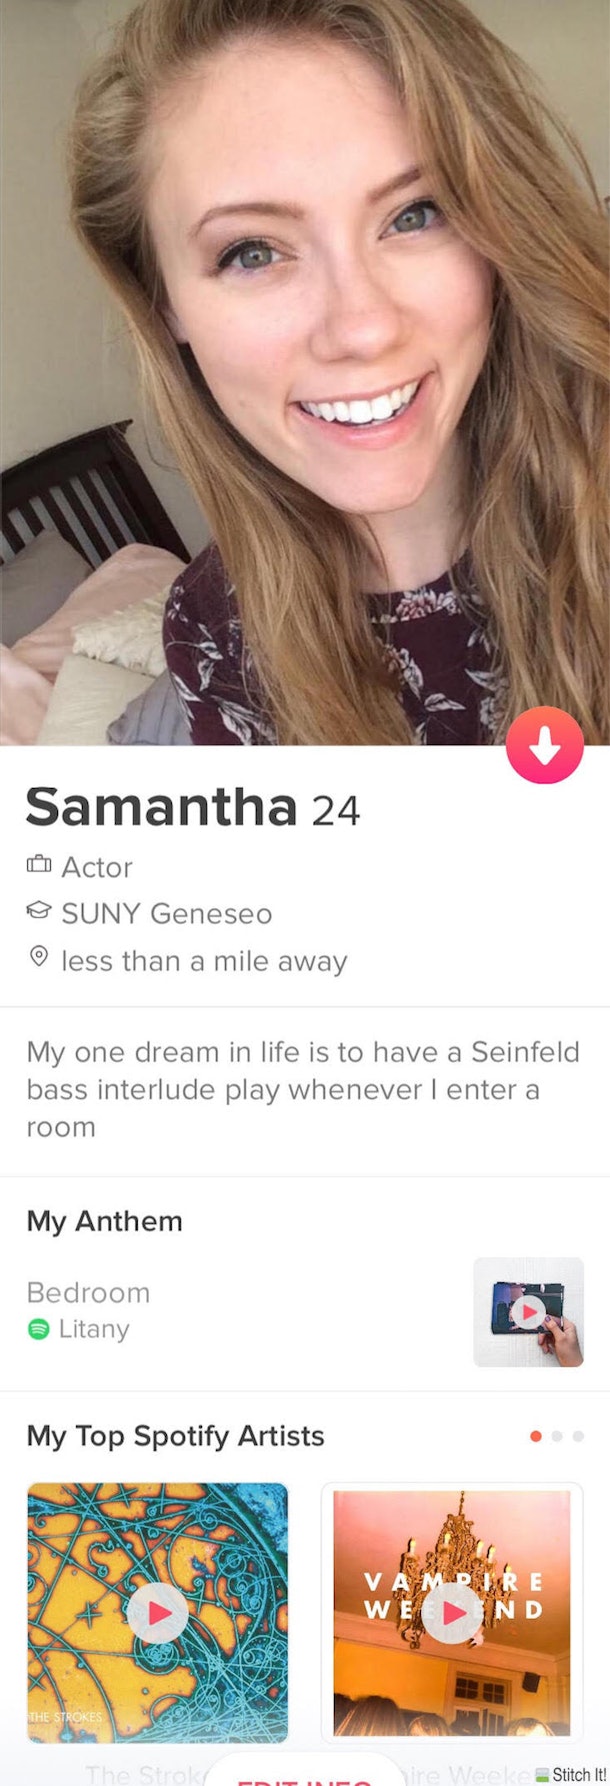 tinder profile with no picture